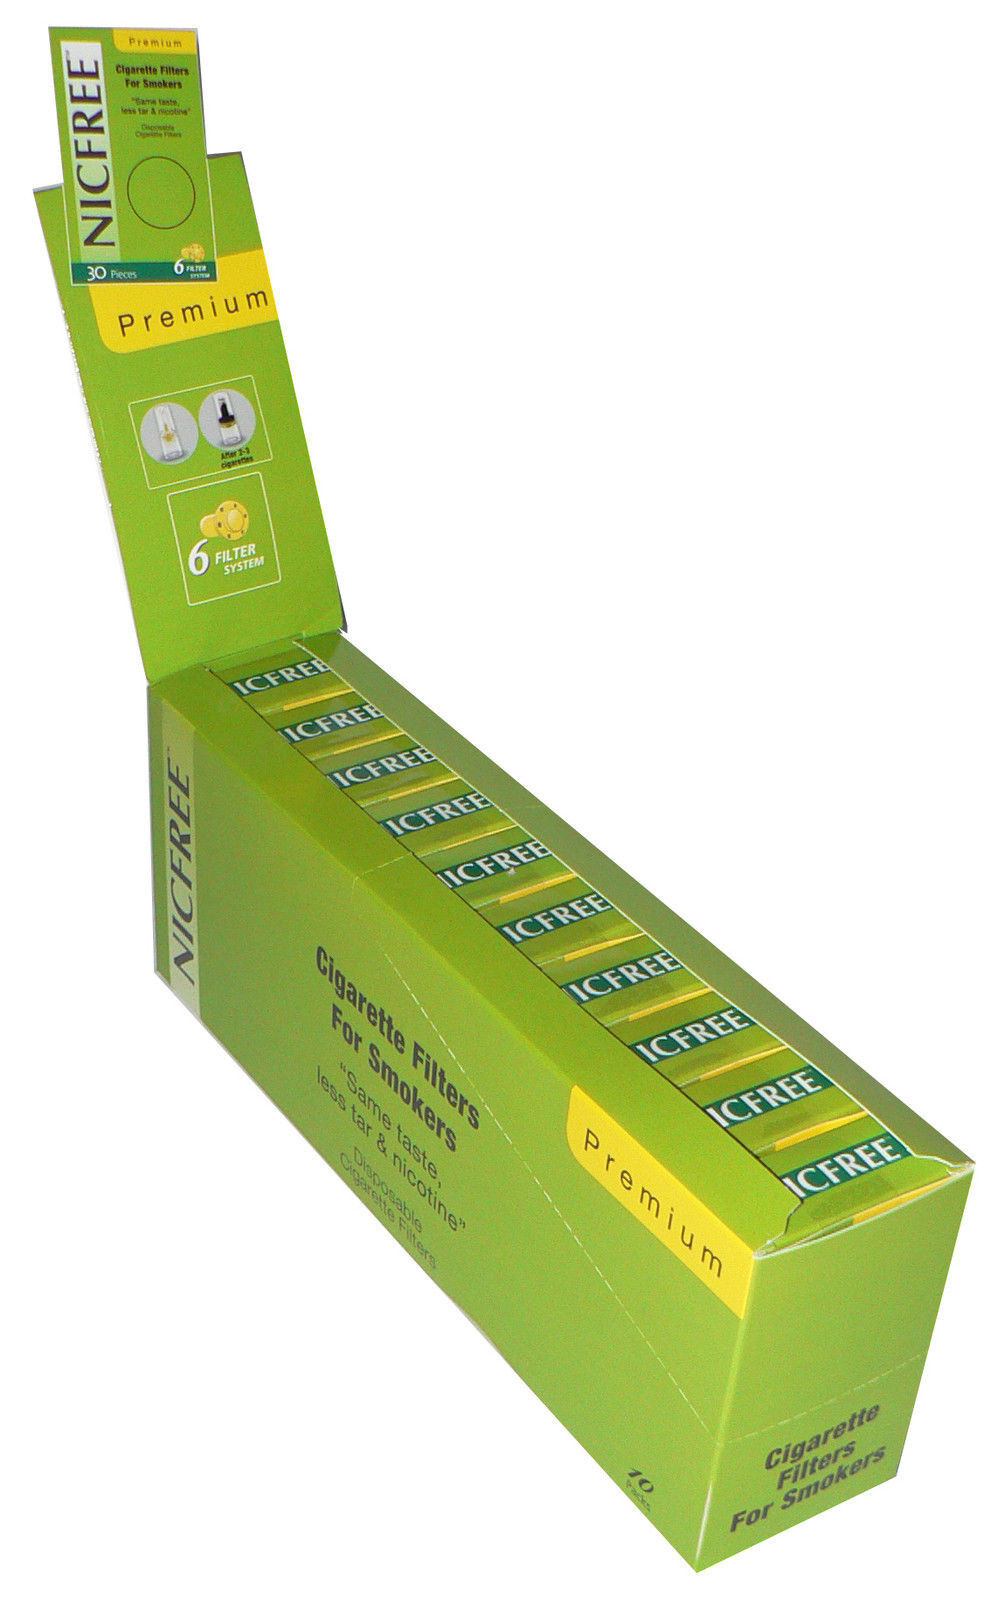 NICFREE Cigarette Filters Remove Tar & Nicotine 10 Pack (300 Filters) SHIPS FREE